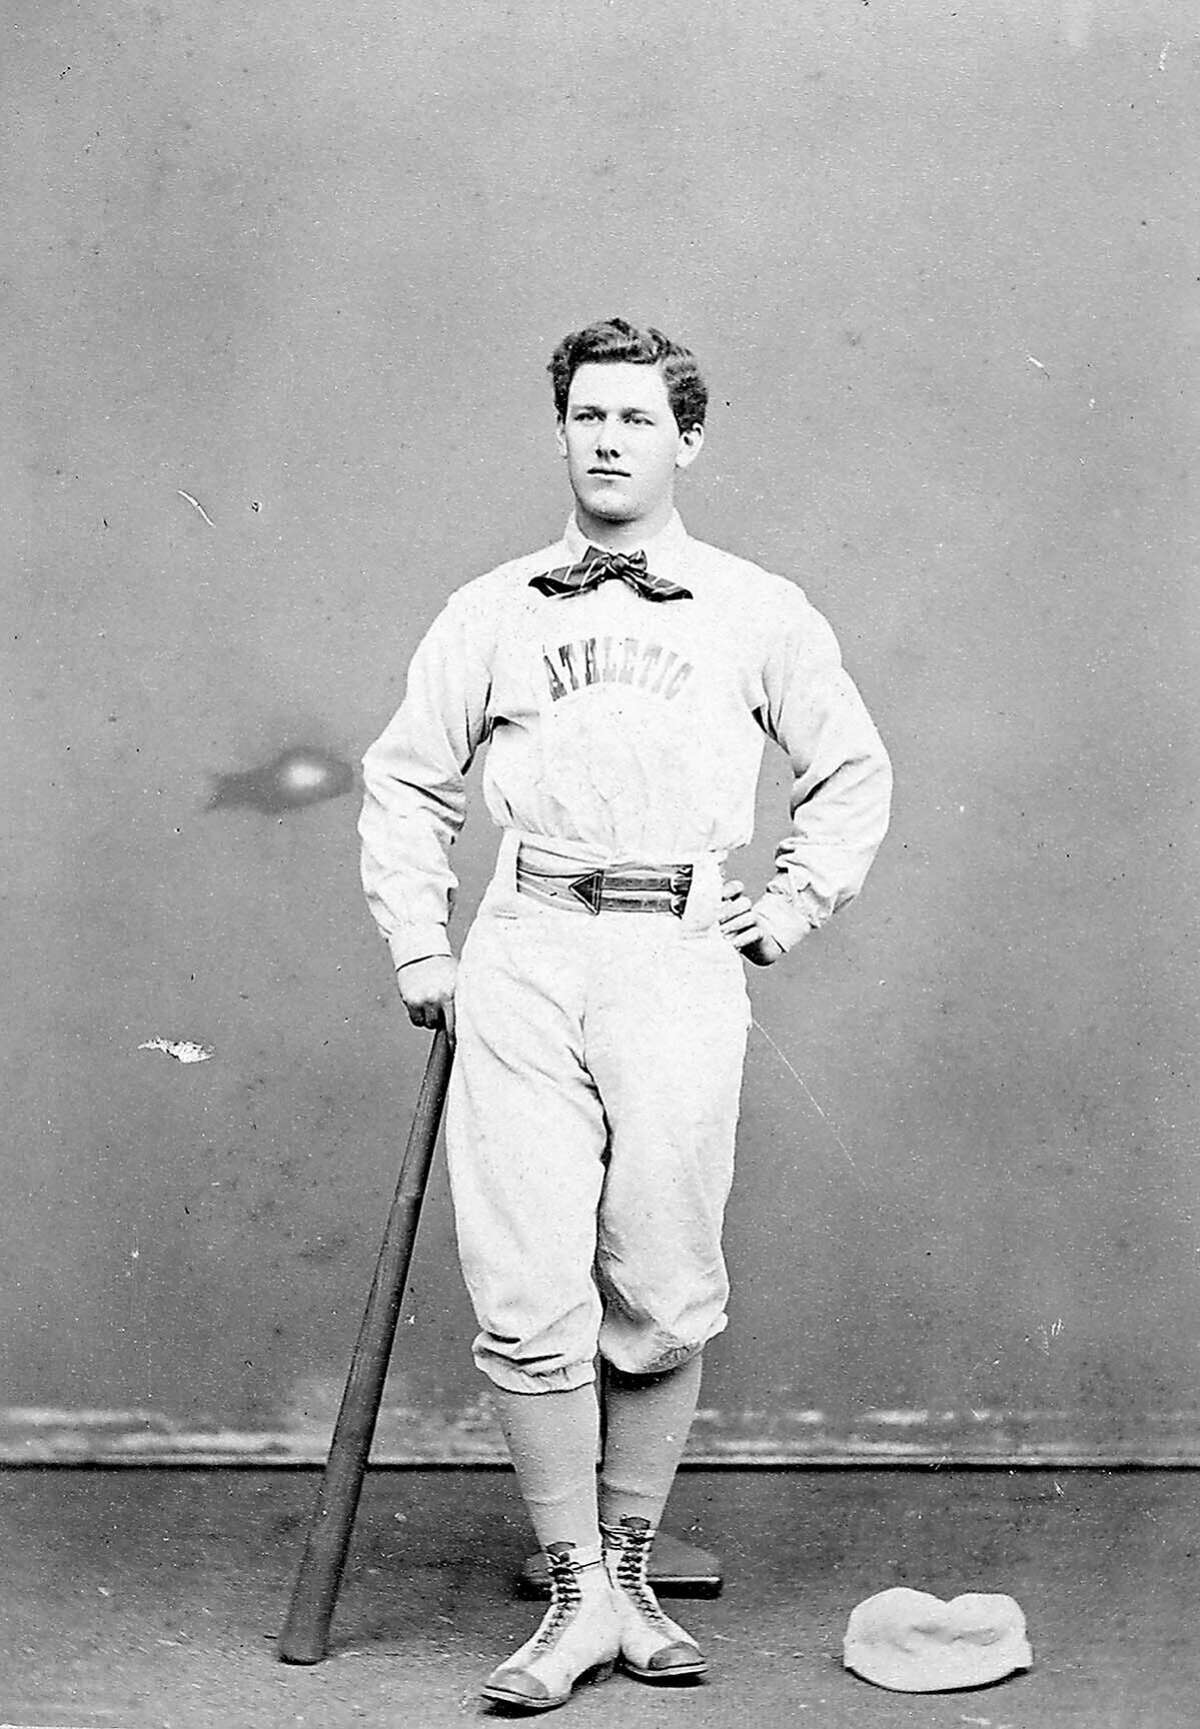 Tim Murnane in 1874, while he played for the Philadelphia Athletics.